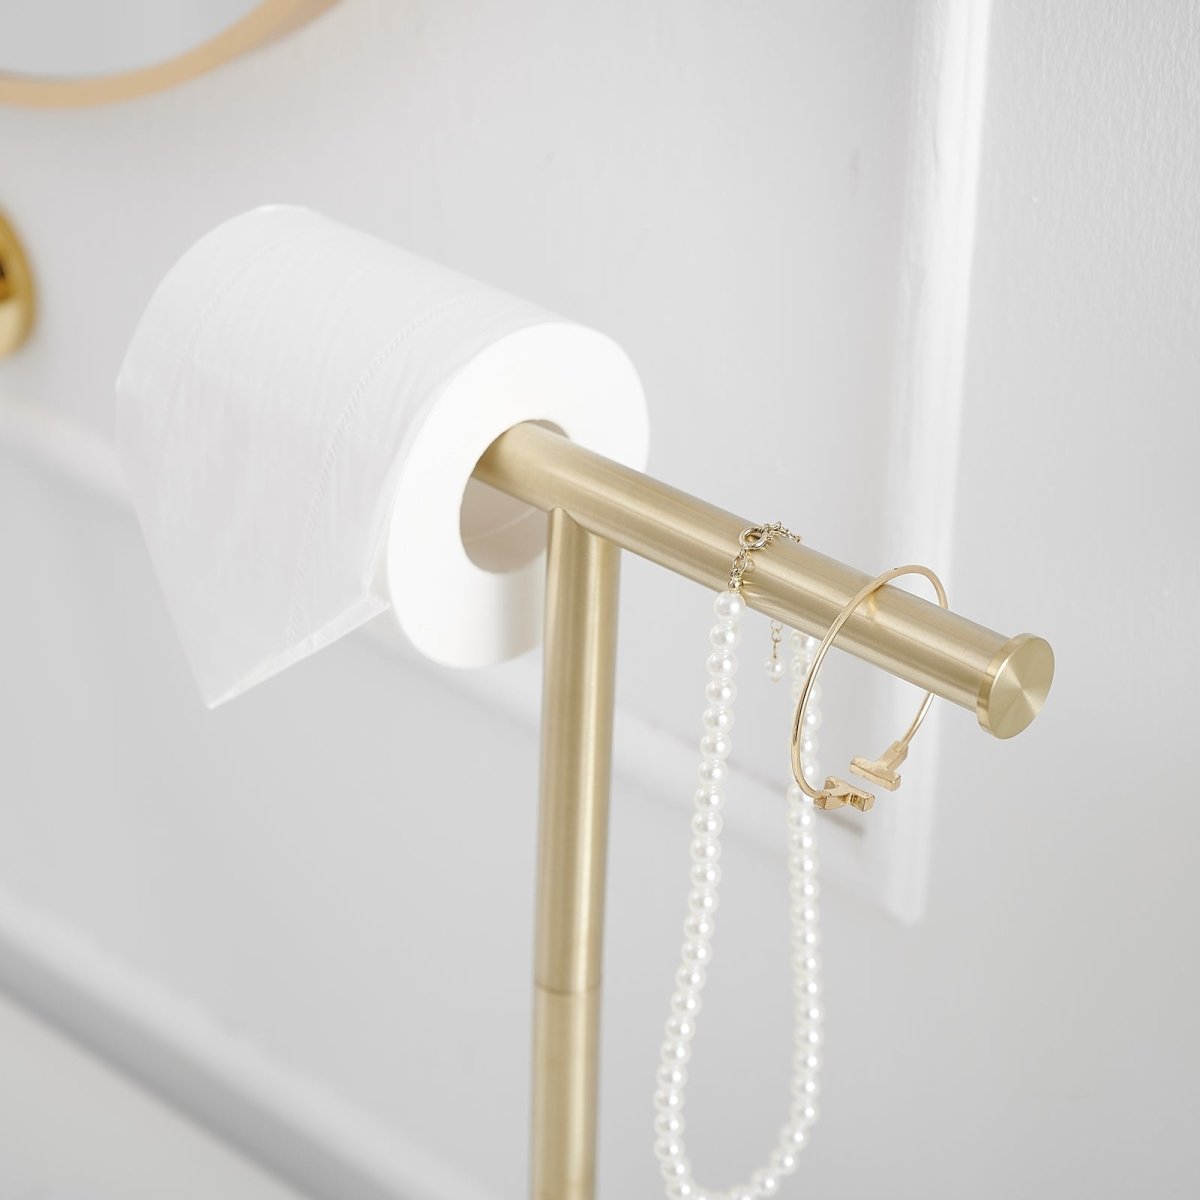 Toilet Paper Holder with Steady T-Shape Towel Rack in Gold - buyfaucet.com